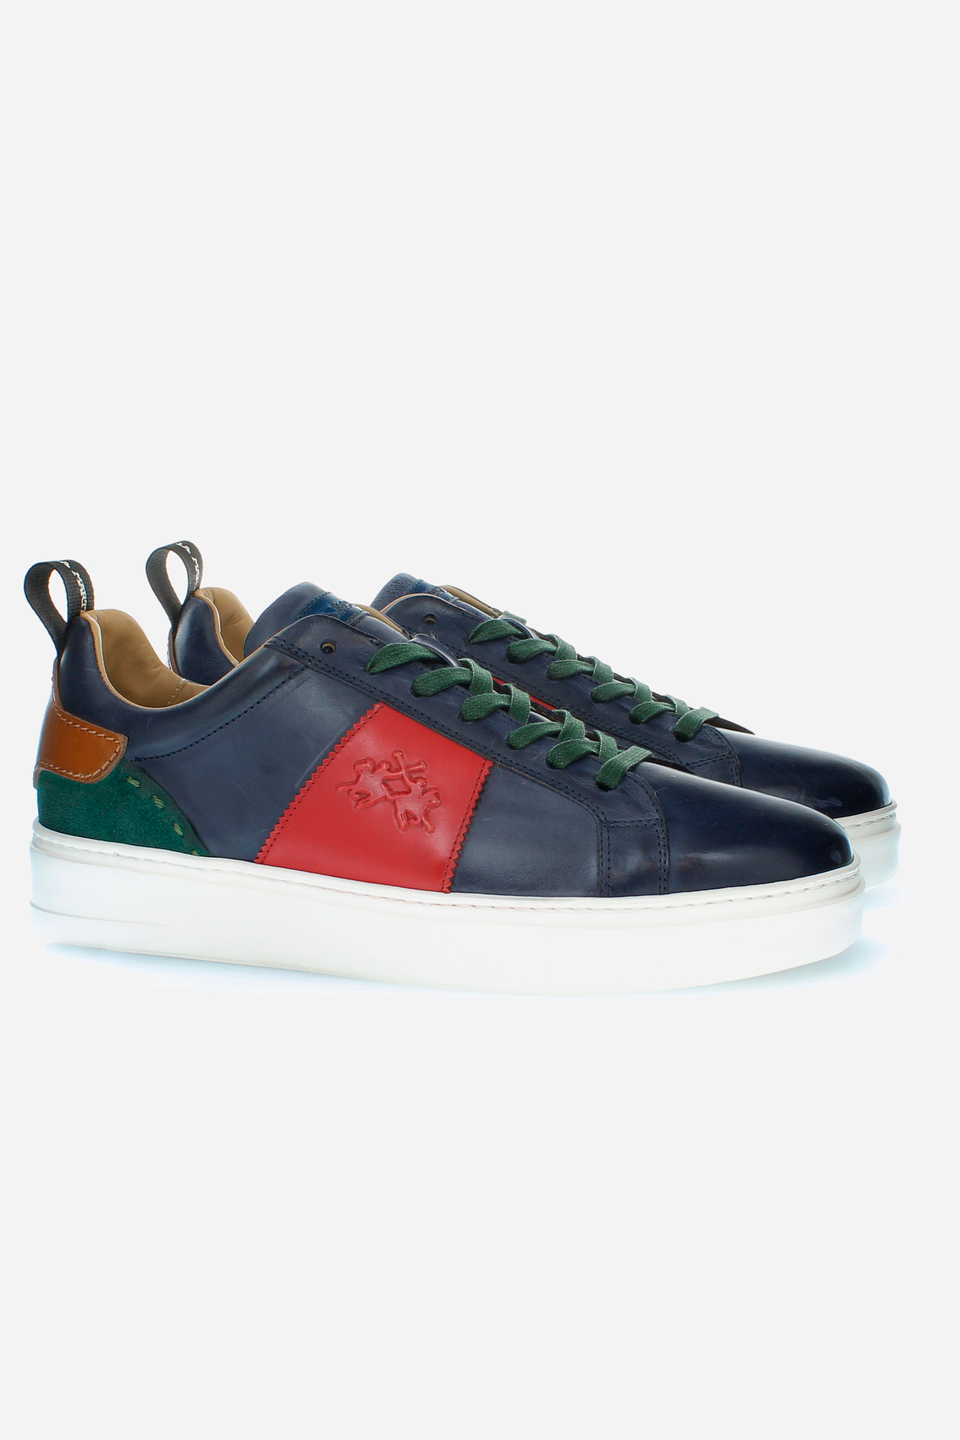 Men’s sneaker in a mix of calfskin and suede | La Martina - Official Online Shop